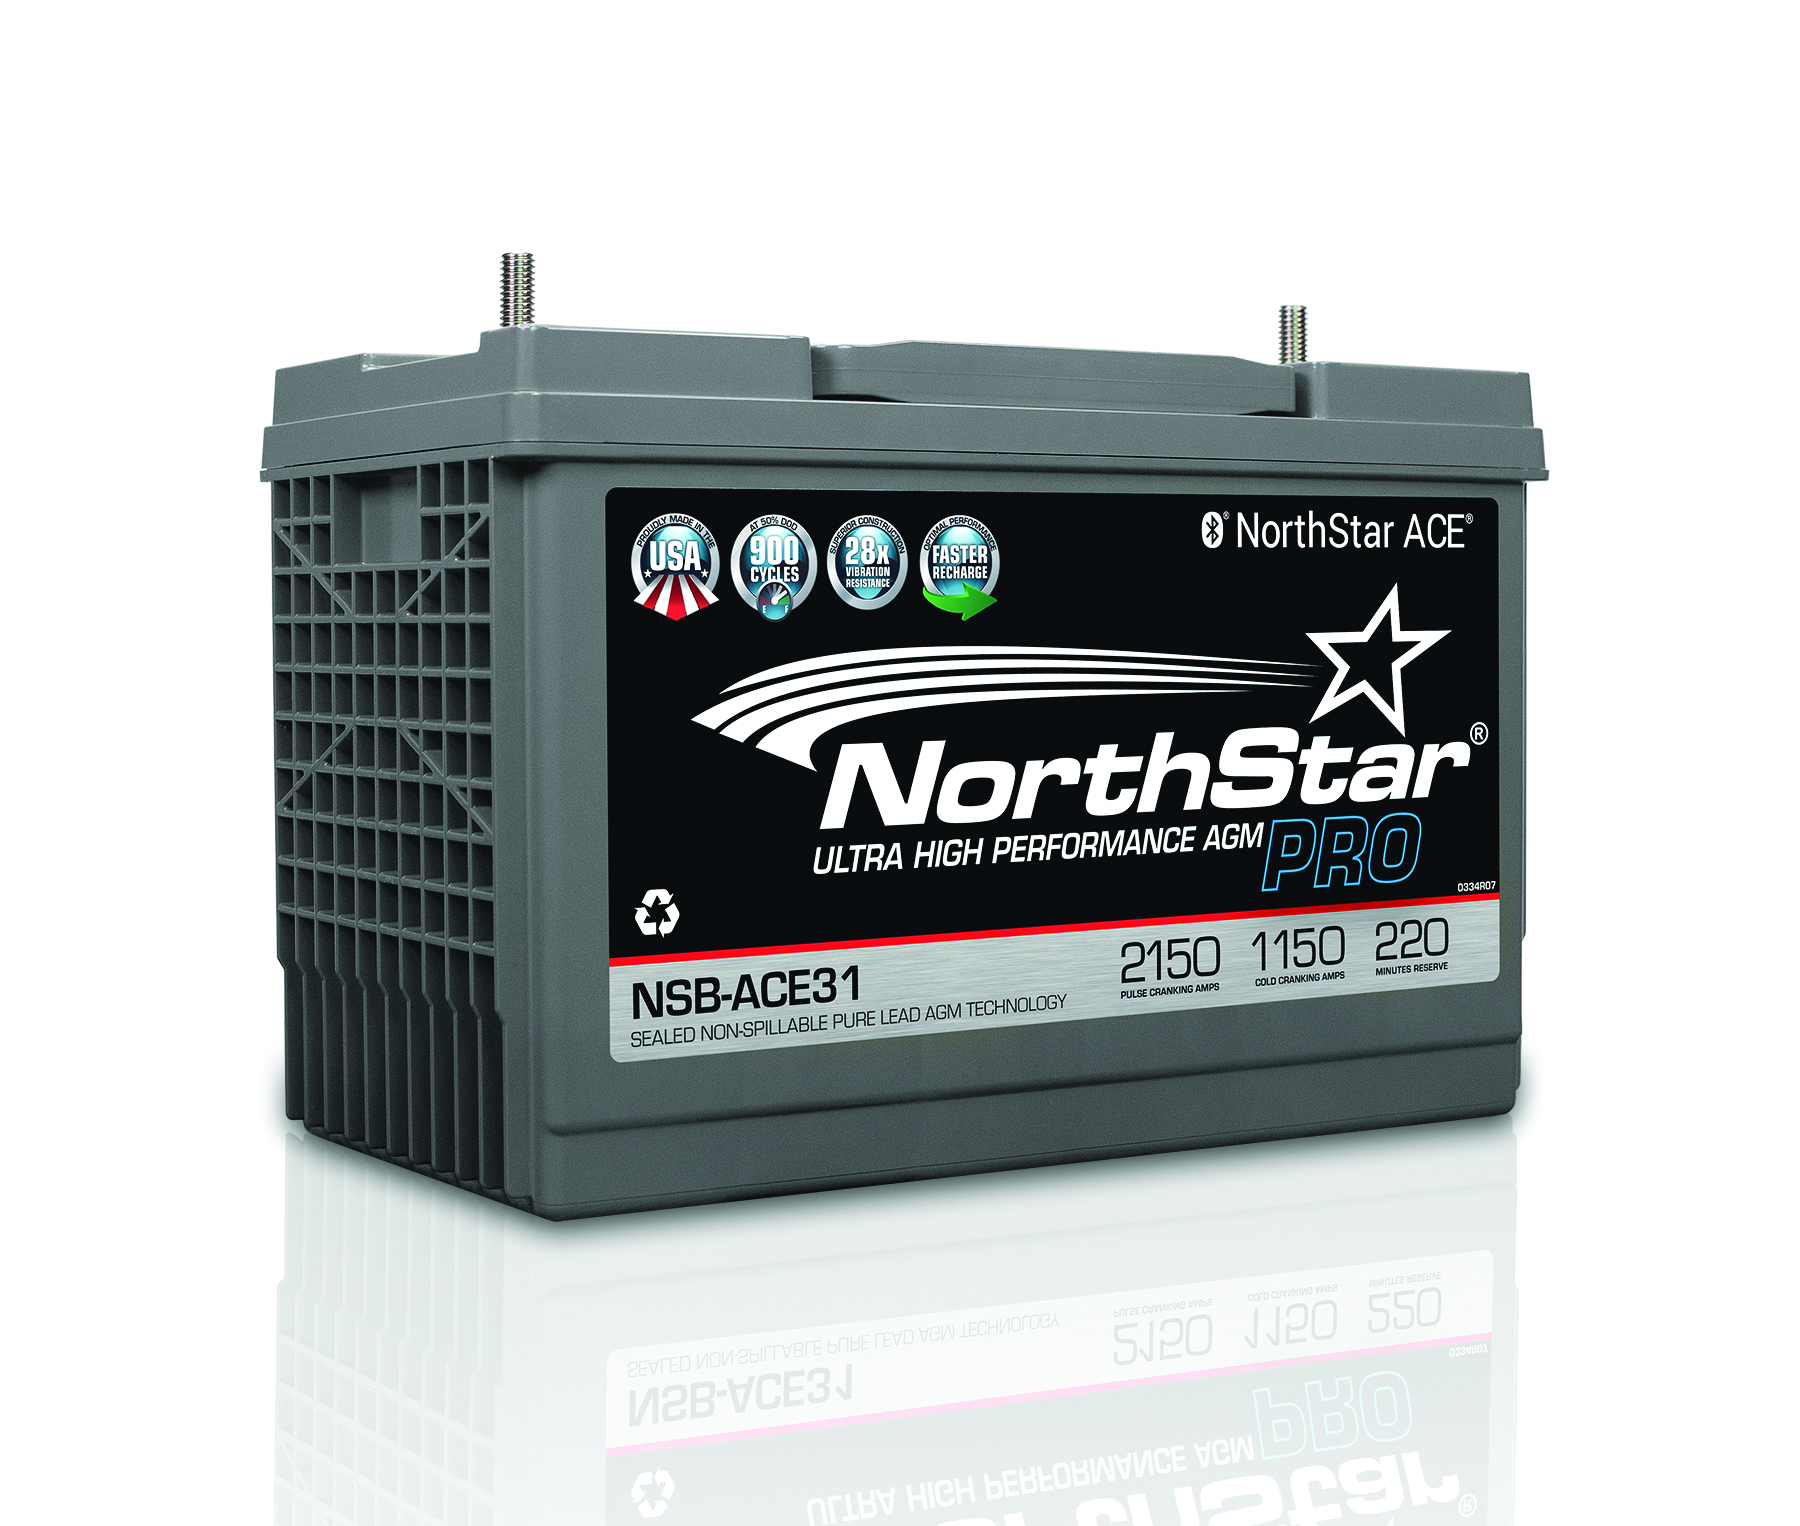 NorthStar Battery, Monday, February 26, 2018, Press release picture